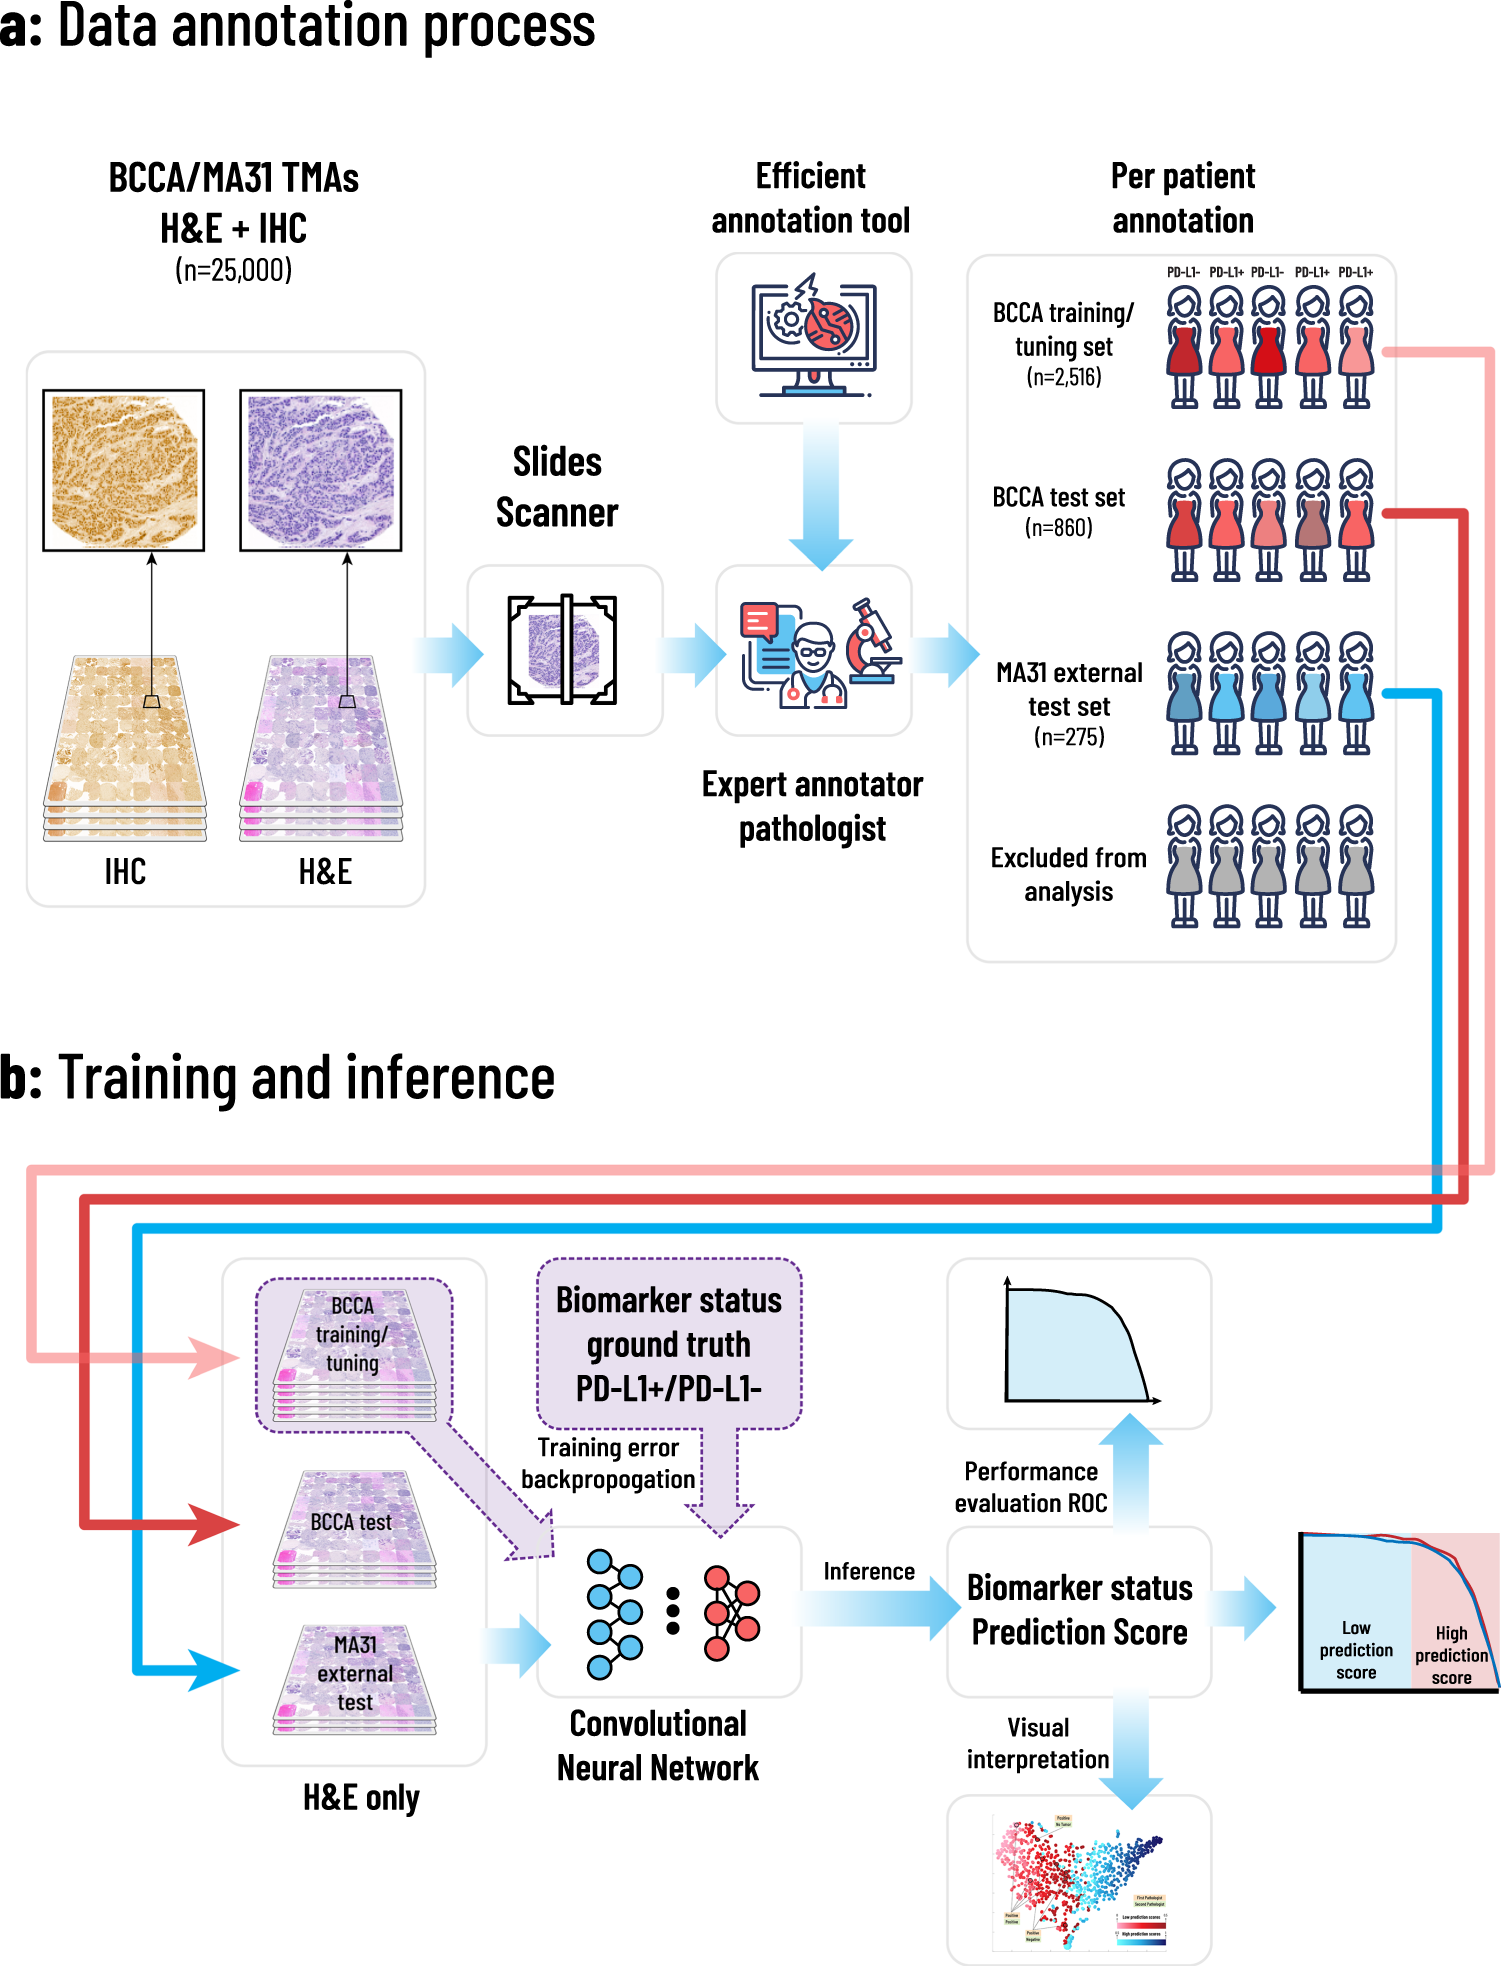 Deep learning-based image analysis predicts PD-L1 status from H&E-stained  histopathology images in breast cancer | Nature Communications